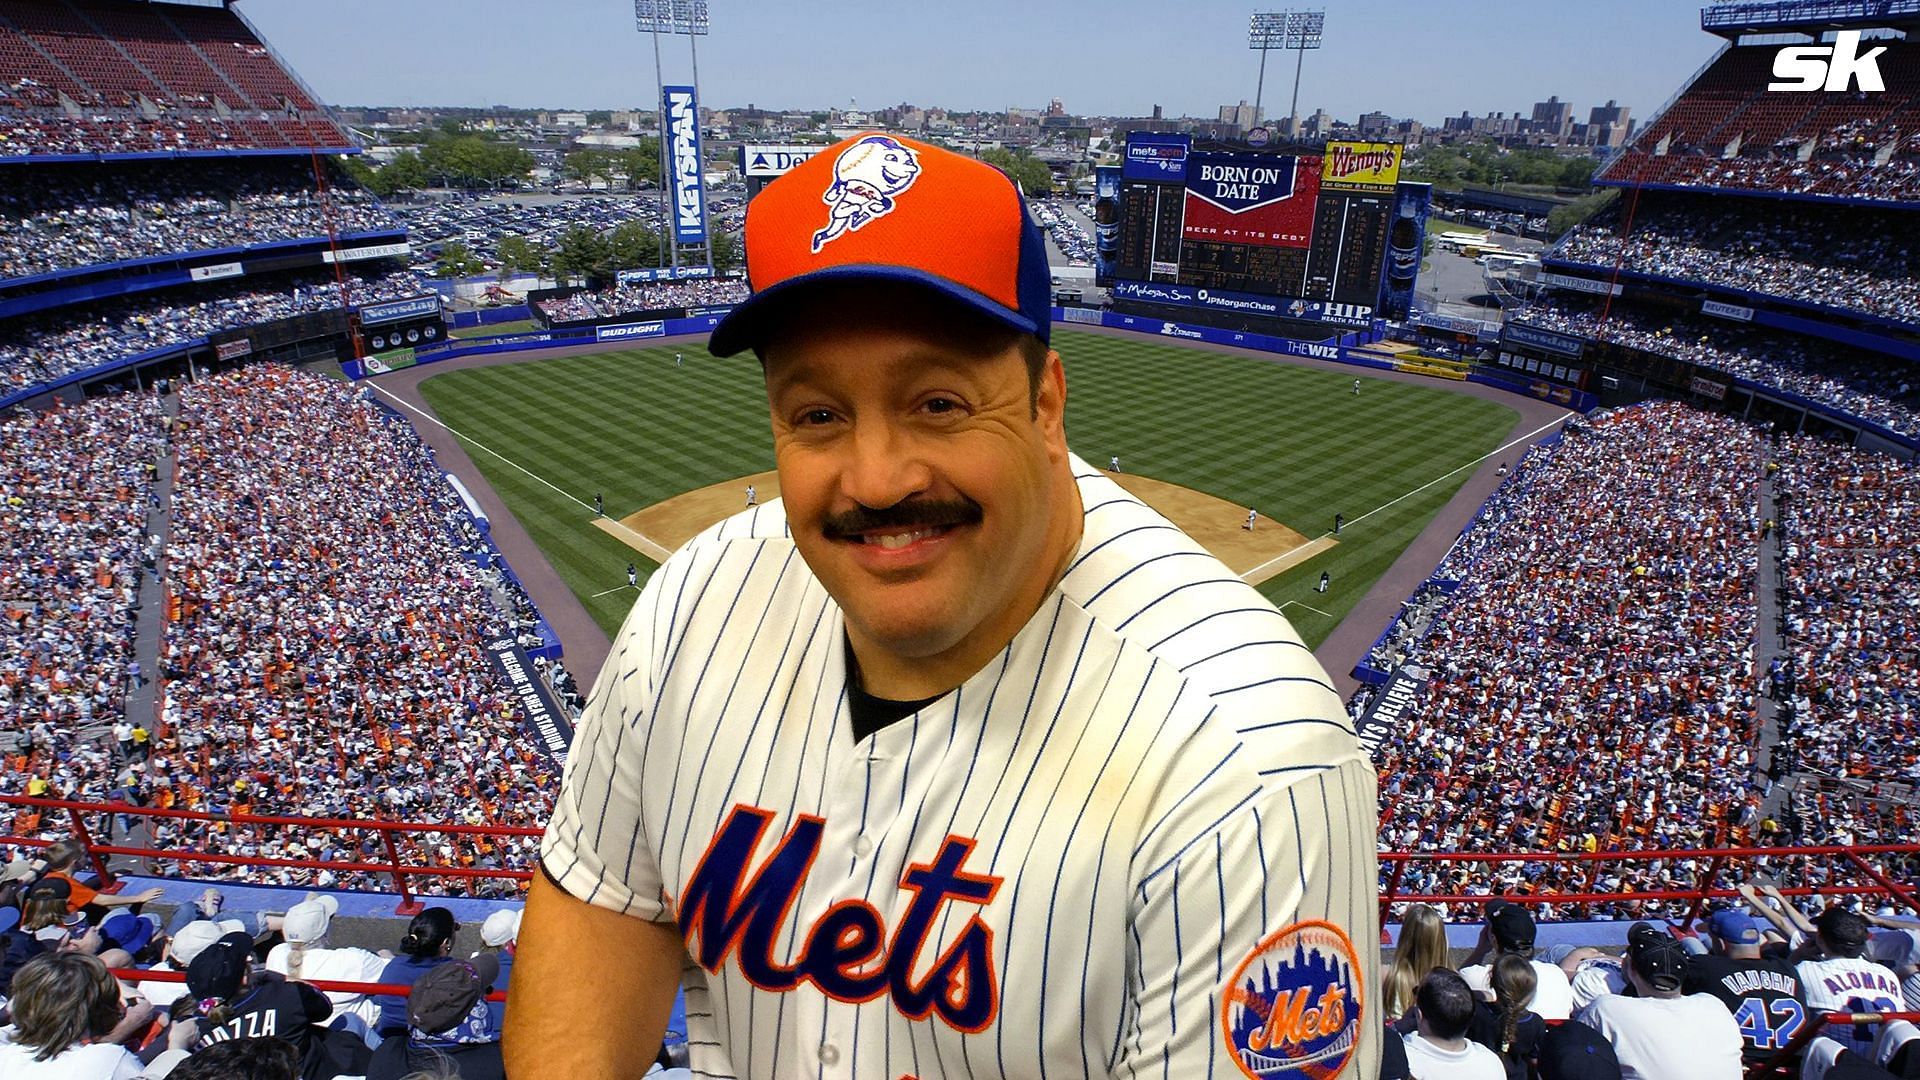 When Kevin James proved his Mets fandom by naming daughter after club